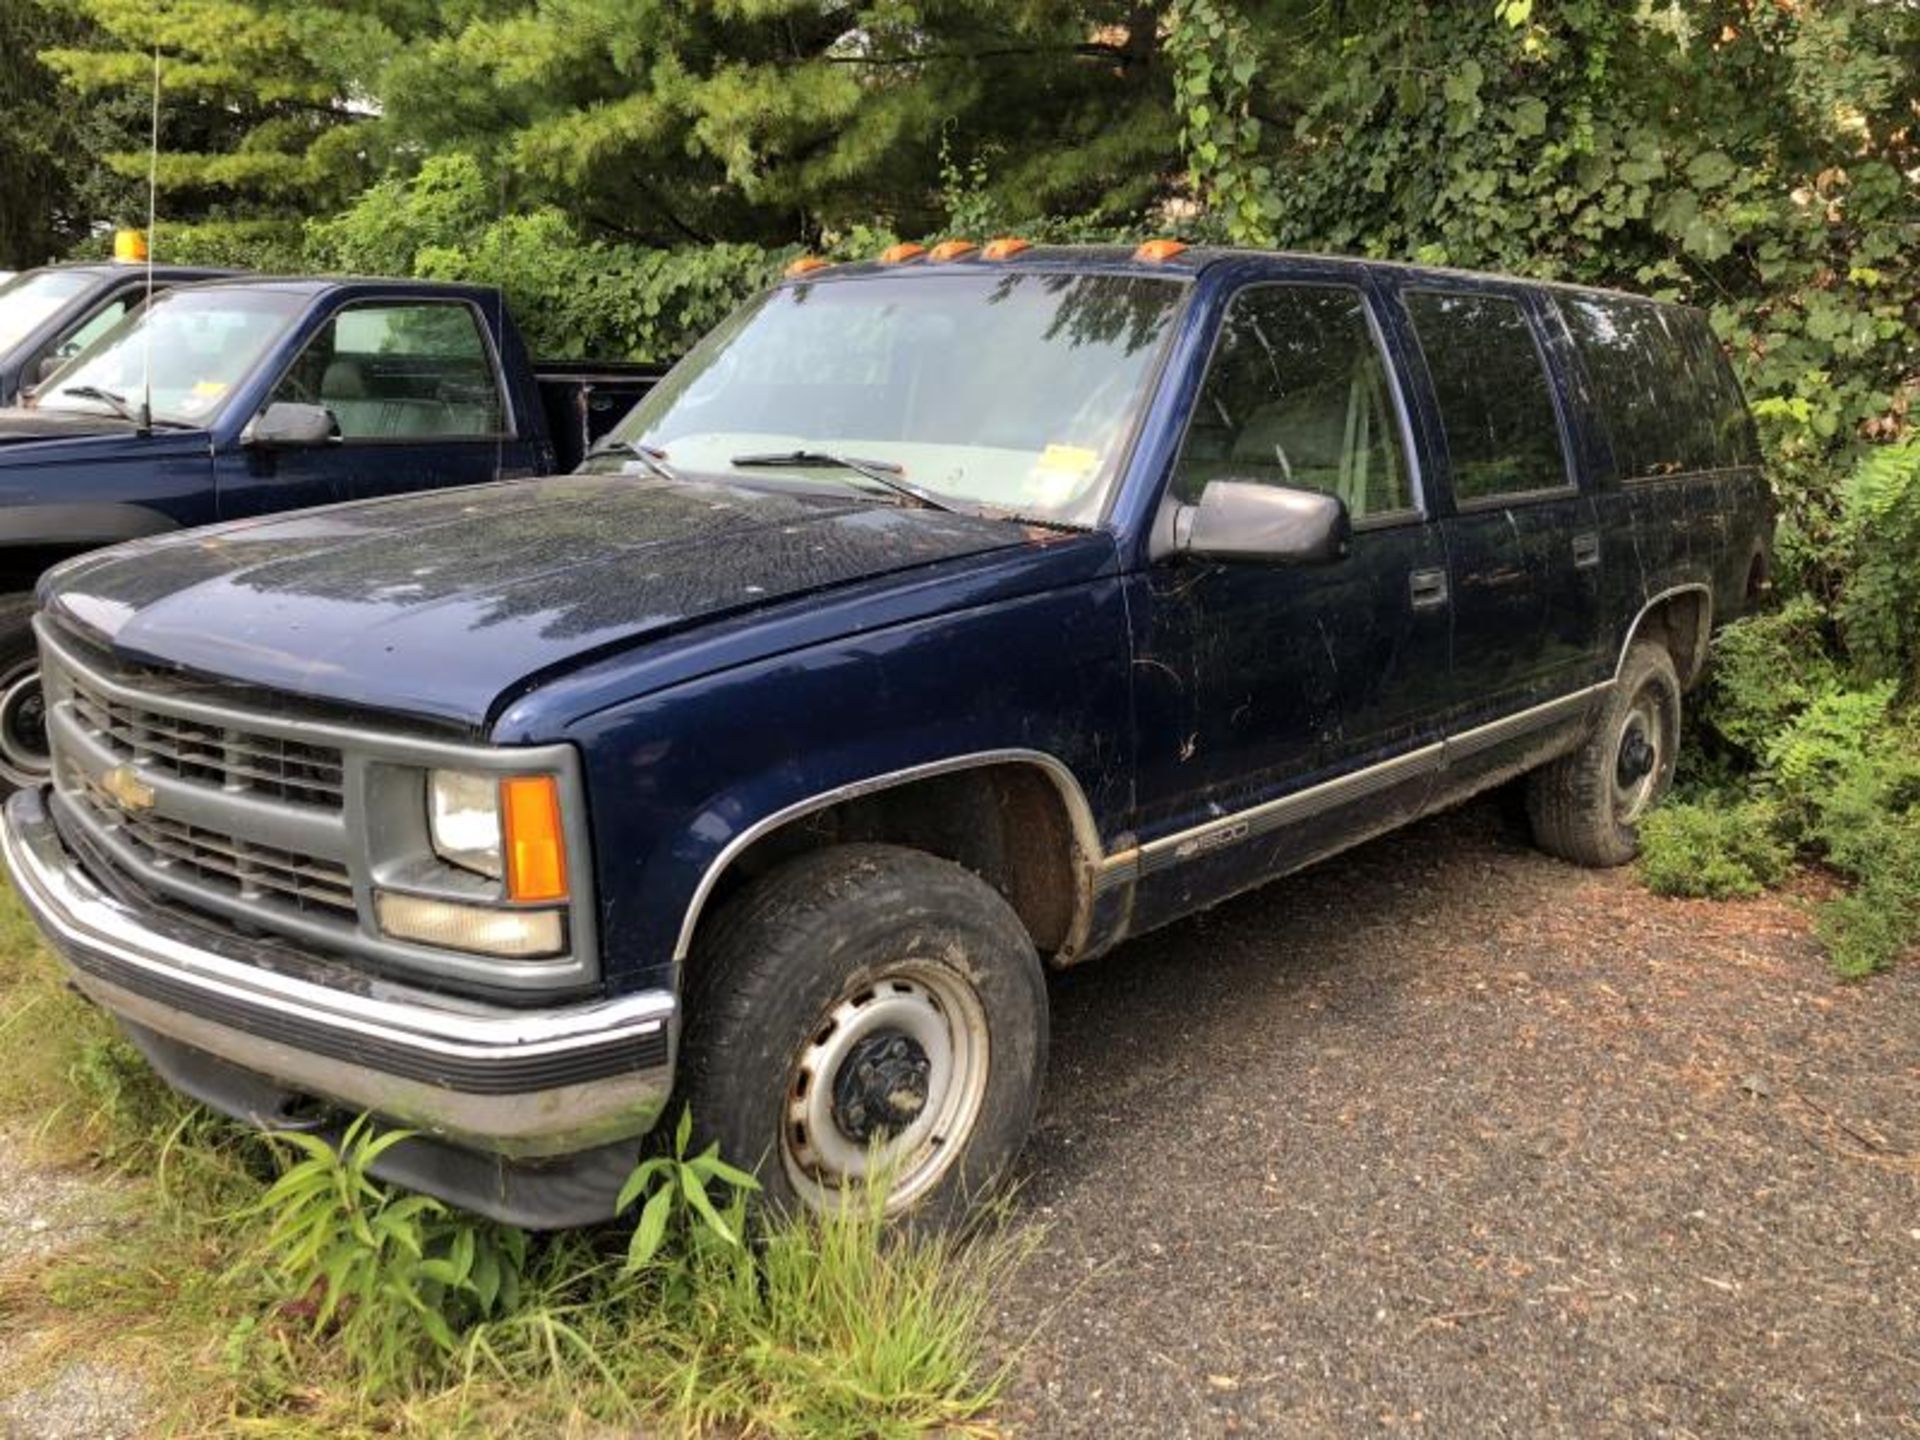 1997 Chevrolet 1500 Suburban, VIN# 3GNFK16R1NG137605, Blue, 122375 Miles, Rough - Rotted